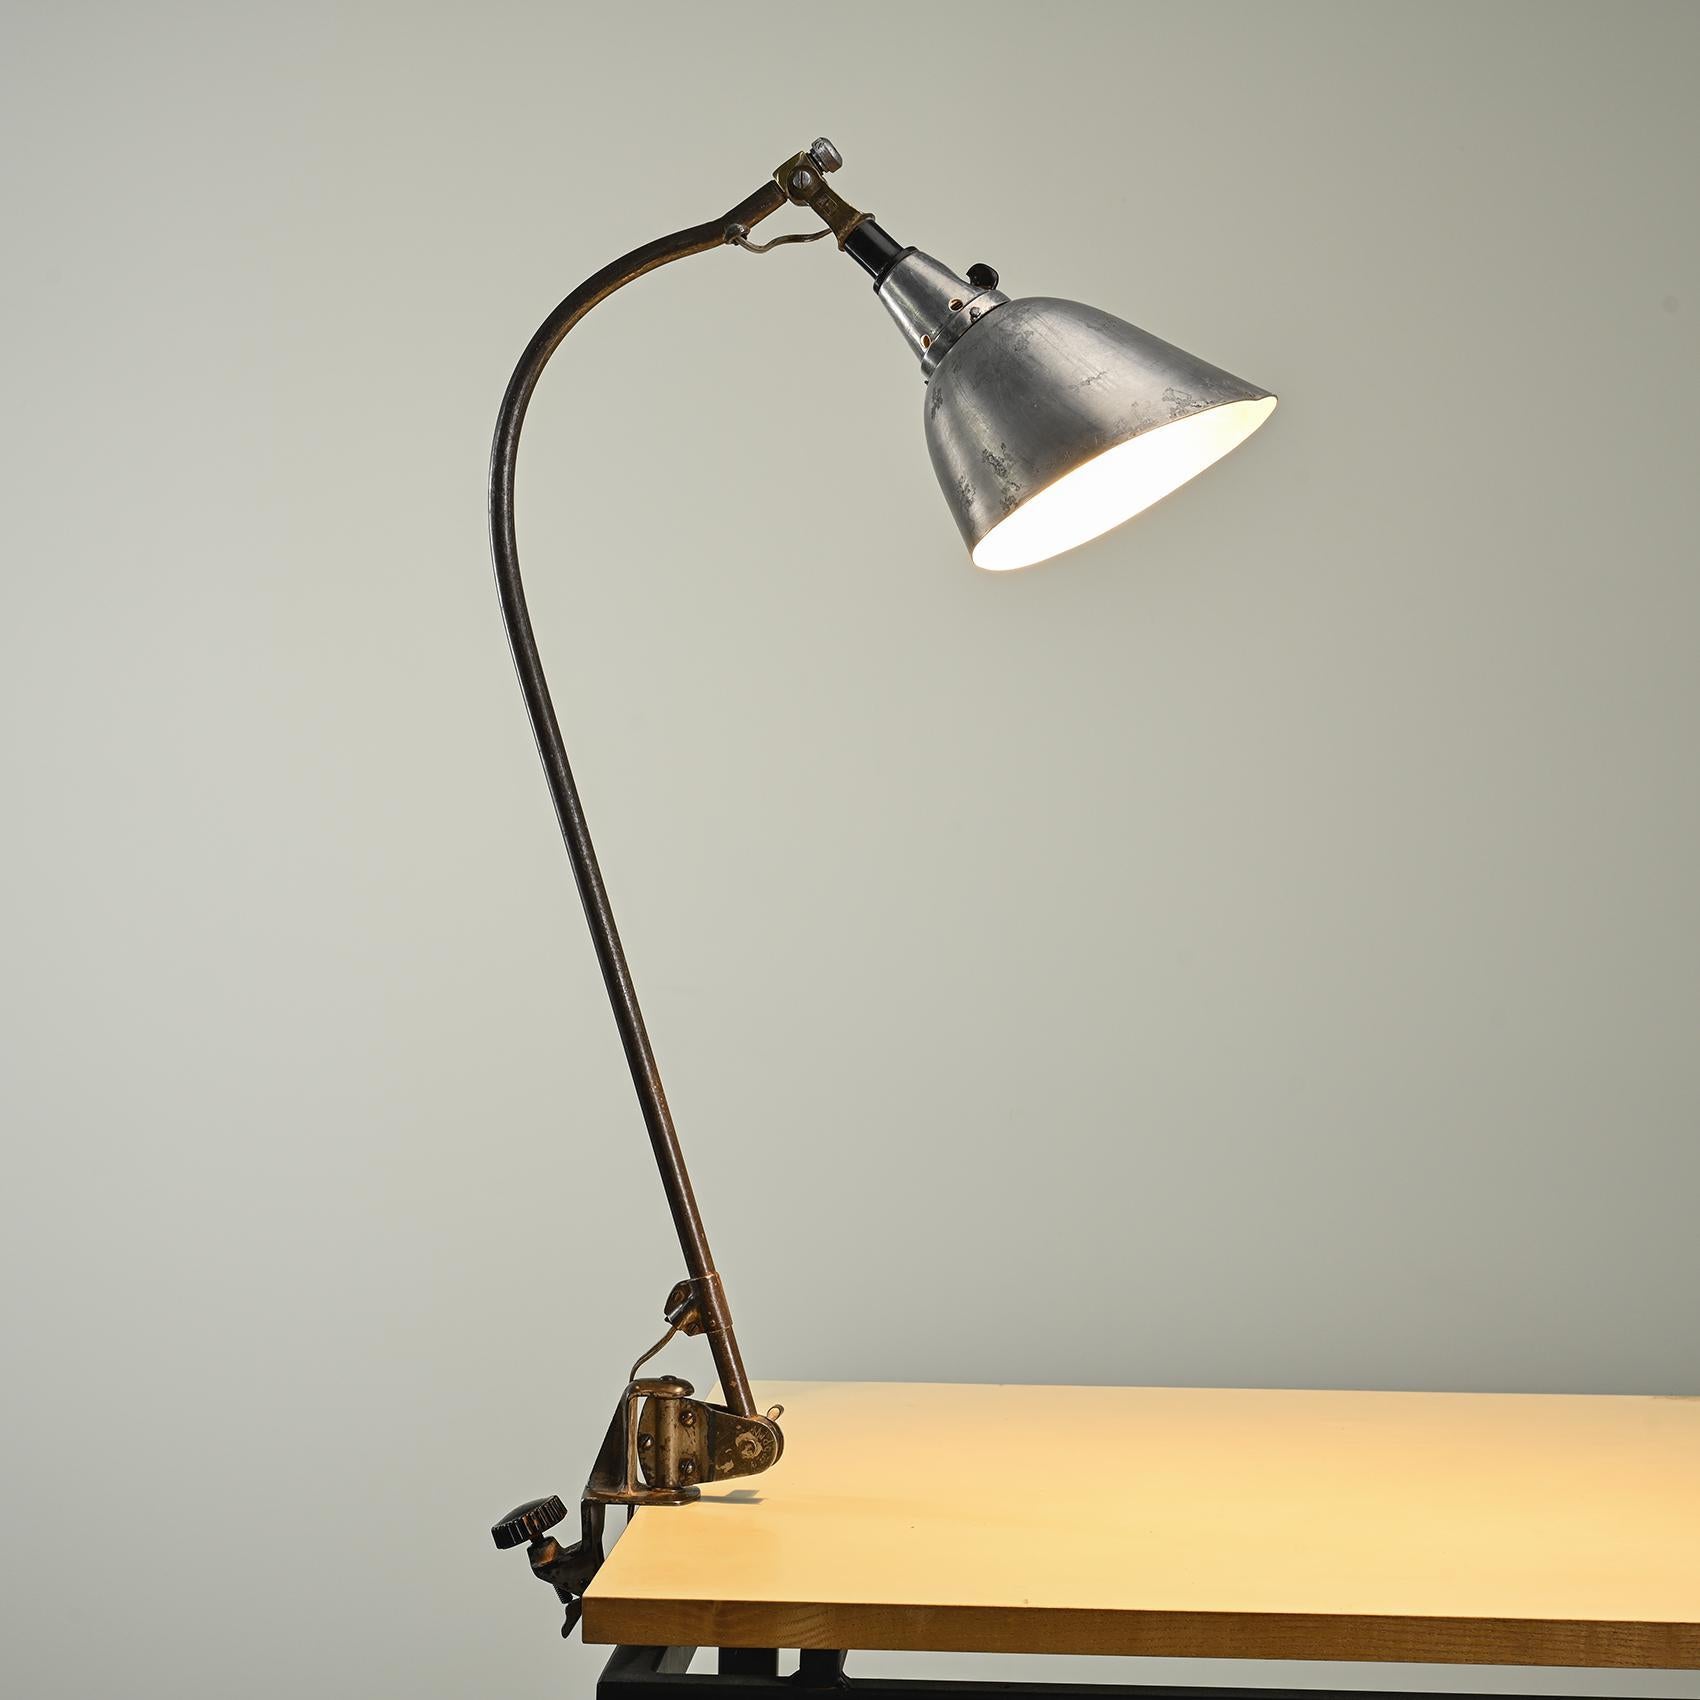 Clamp lamp from the 1930s, chosen by Walter Gropius to equip the Bauhaus building in Dessau in 1926.

This adjustable clamp lamp, known as model Typ 113 Peitsche, has a bent arm housing an aluminum sheet diffuser and a Bakelite switch.

Marked